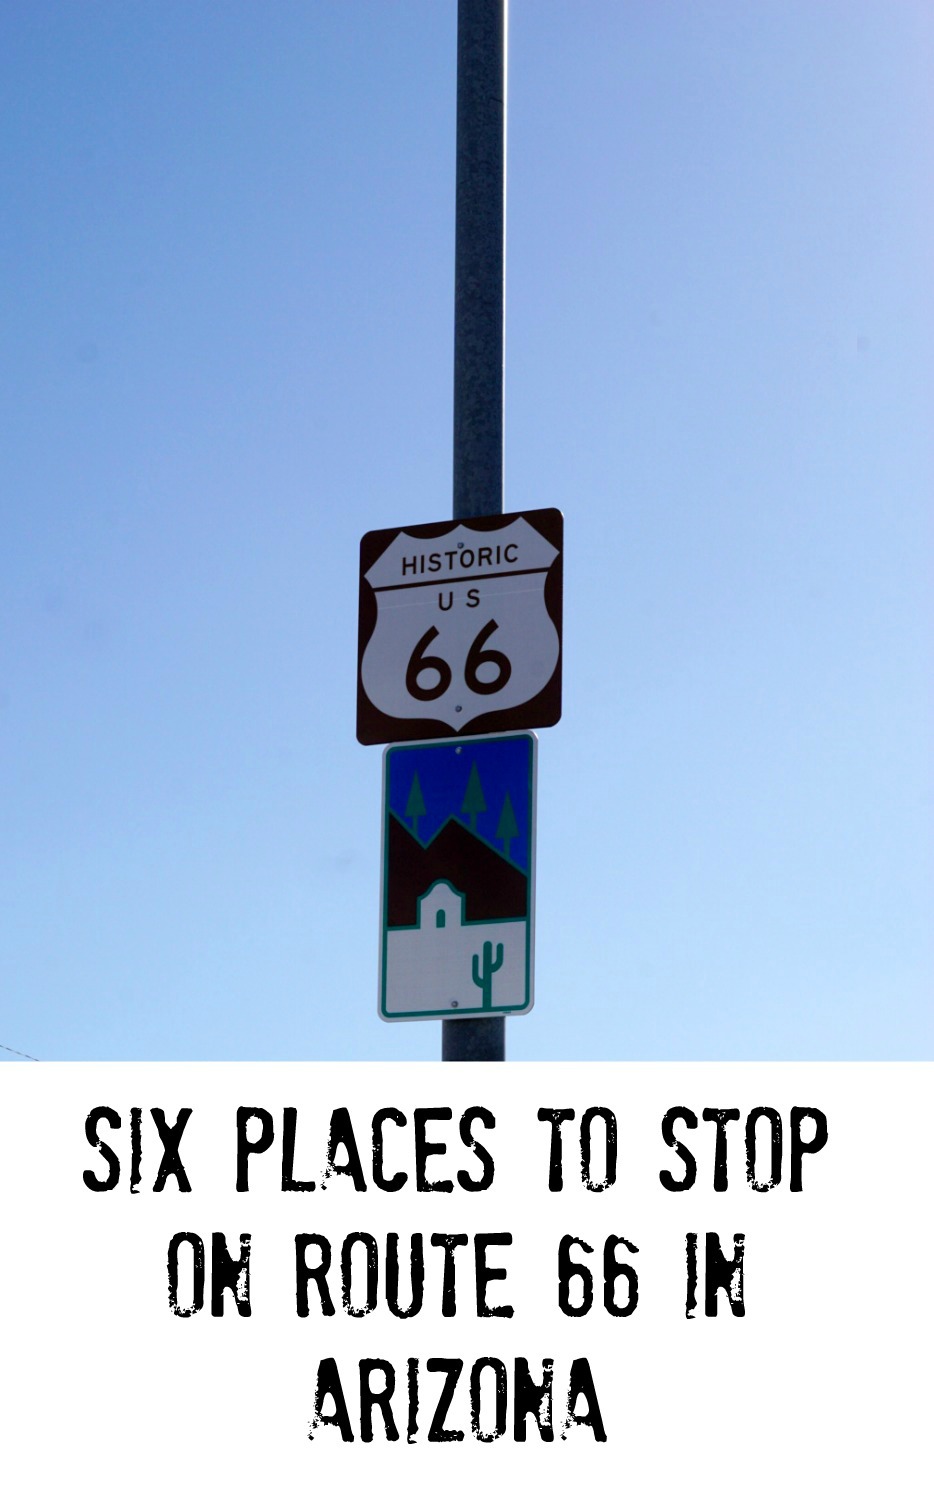 Siz Places to stop on I-40 Along Route 66 in Arizona